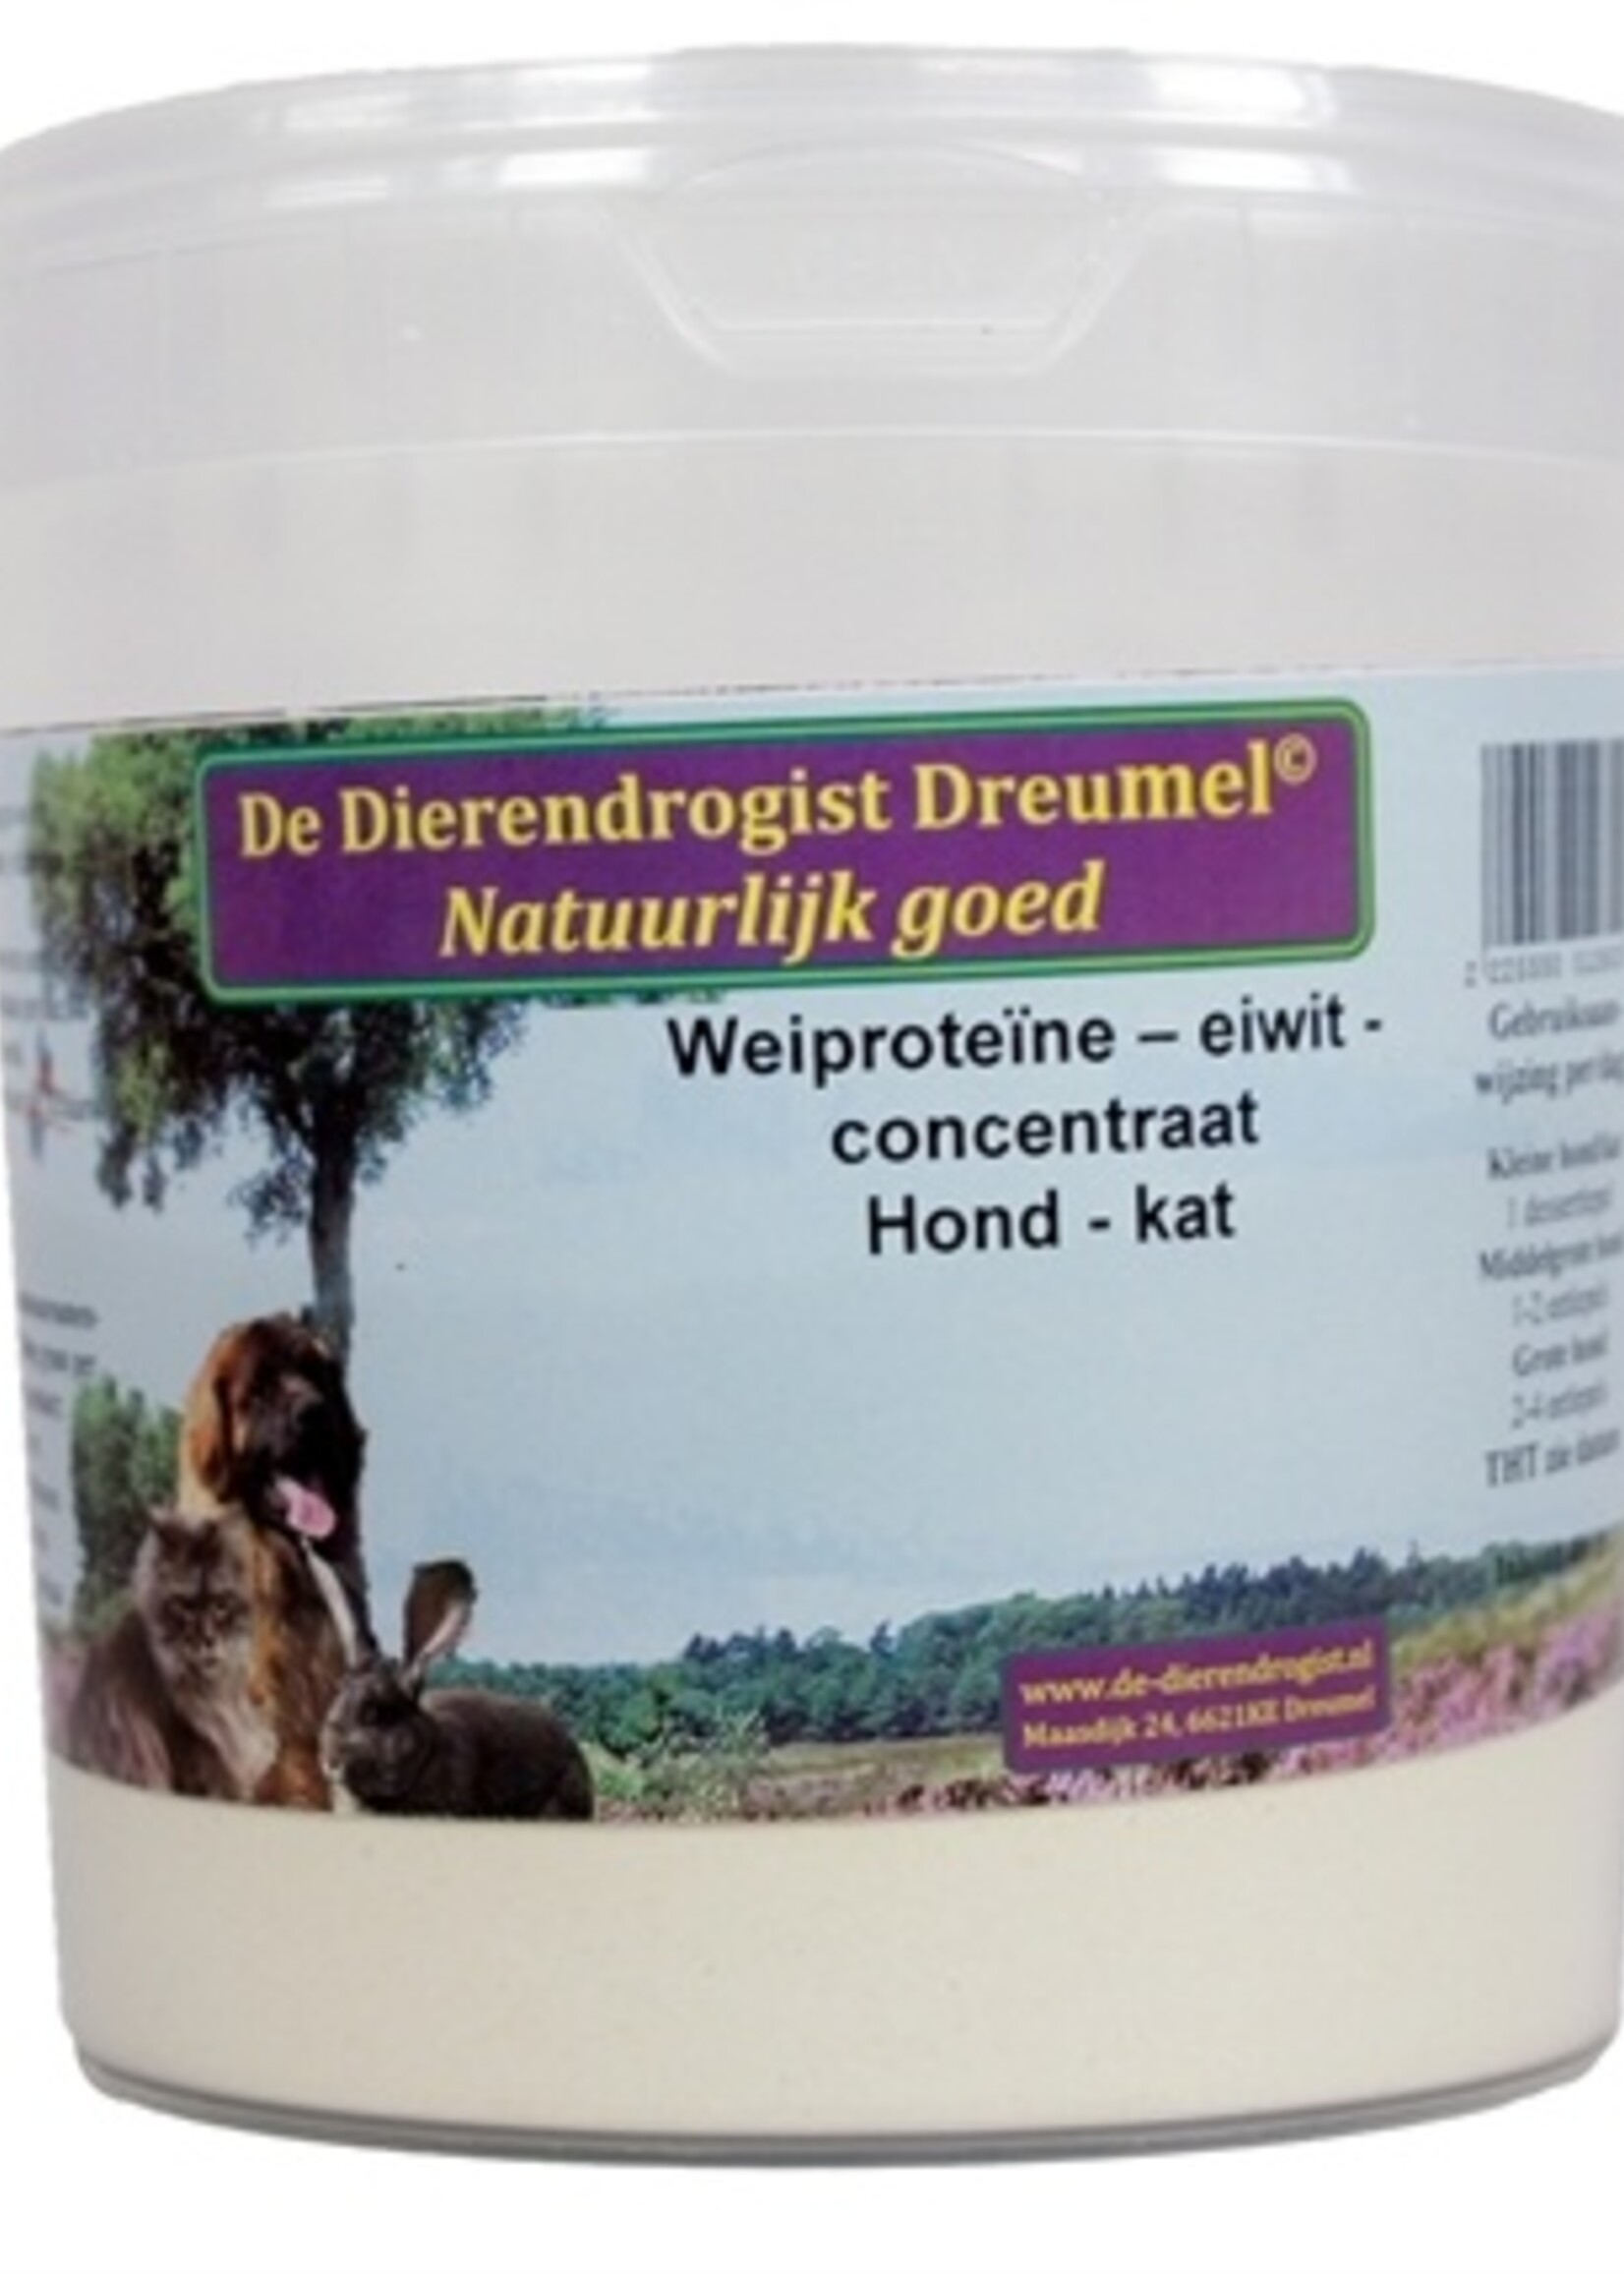 Dierendrogist Dierendrogist weiproteine concentraat hond / kat